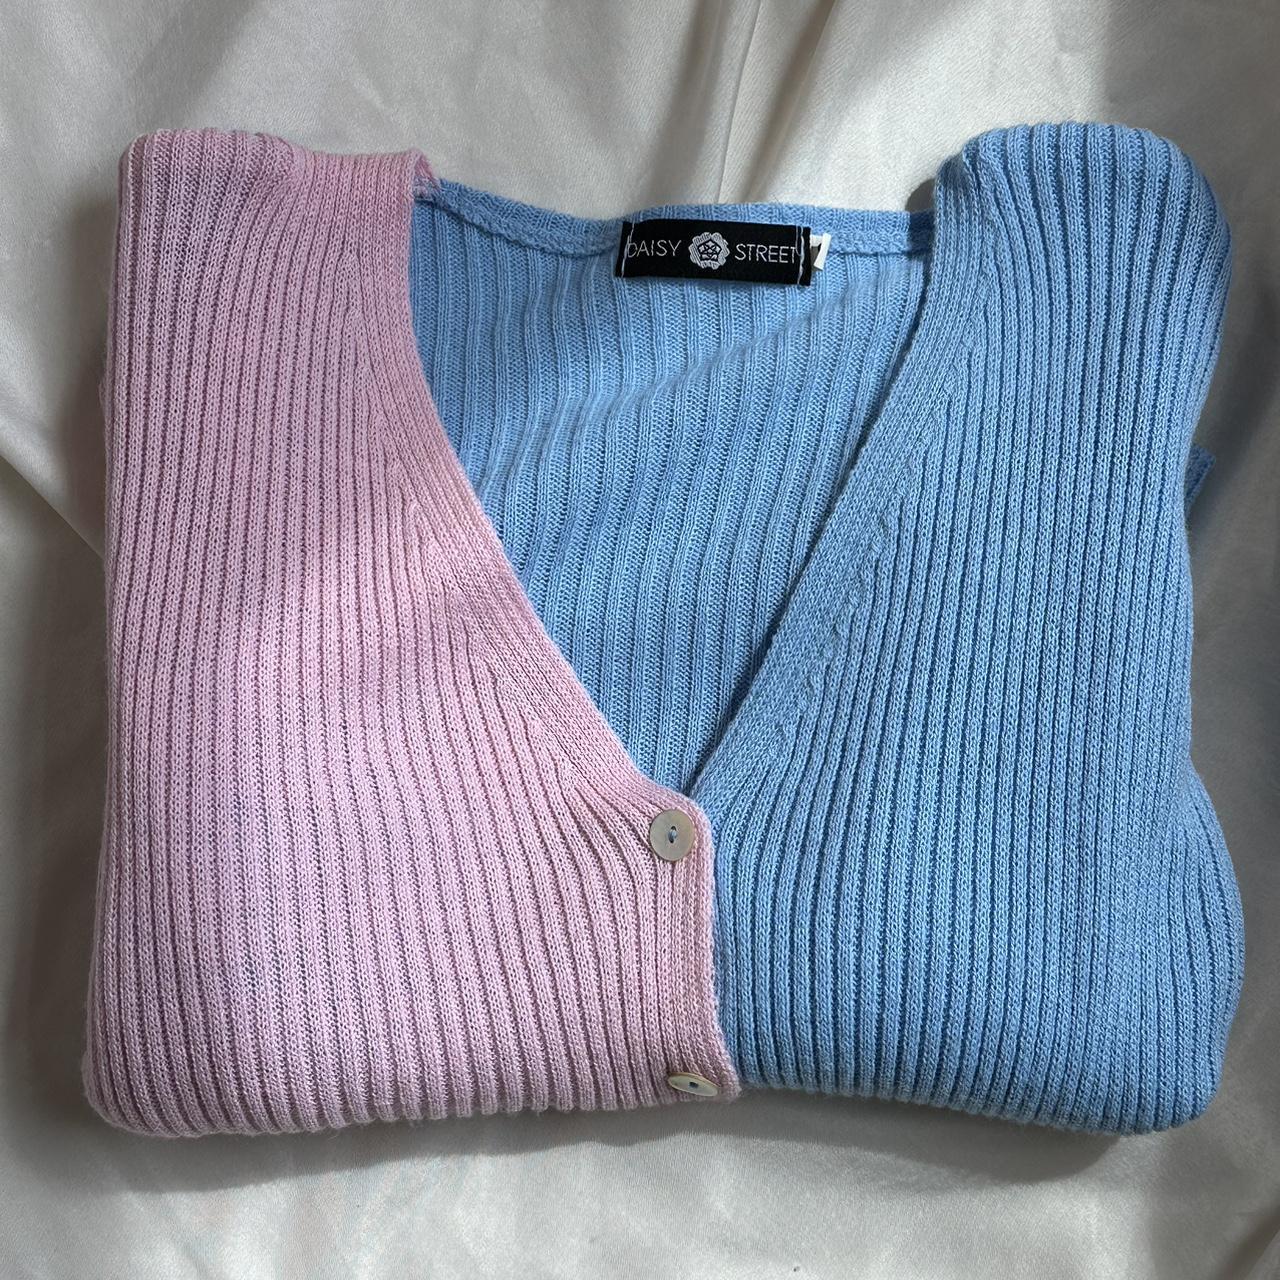 Daisy Street Women's Pink and Blue Cardigan